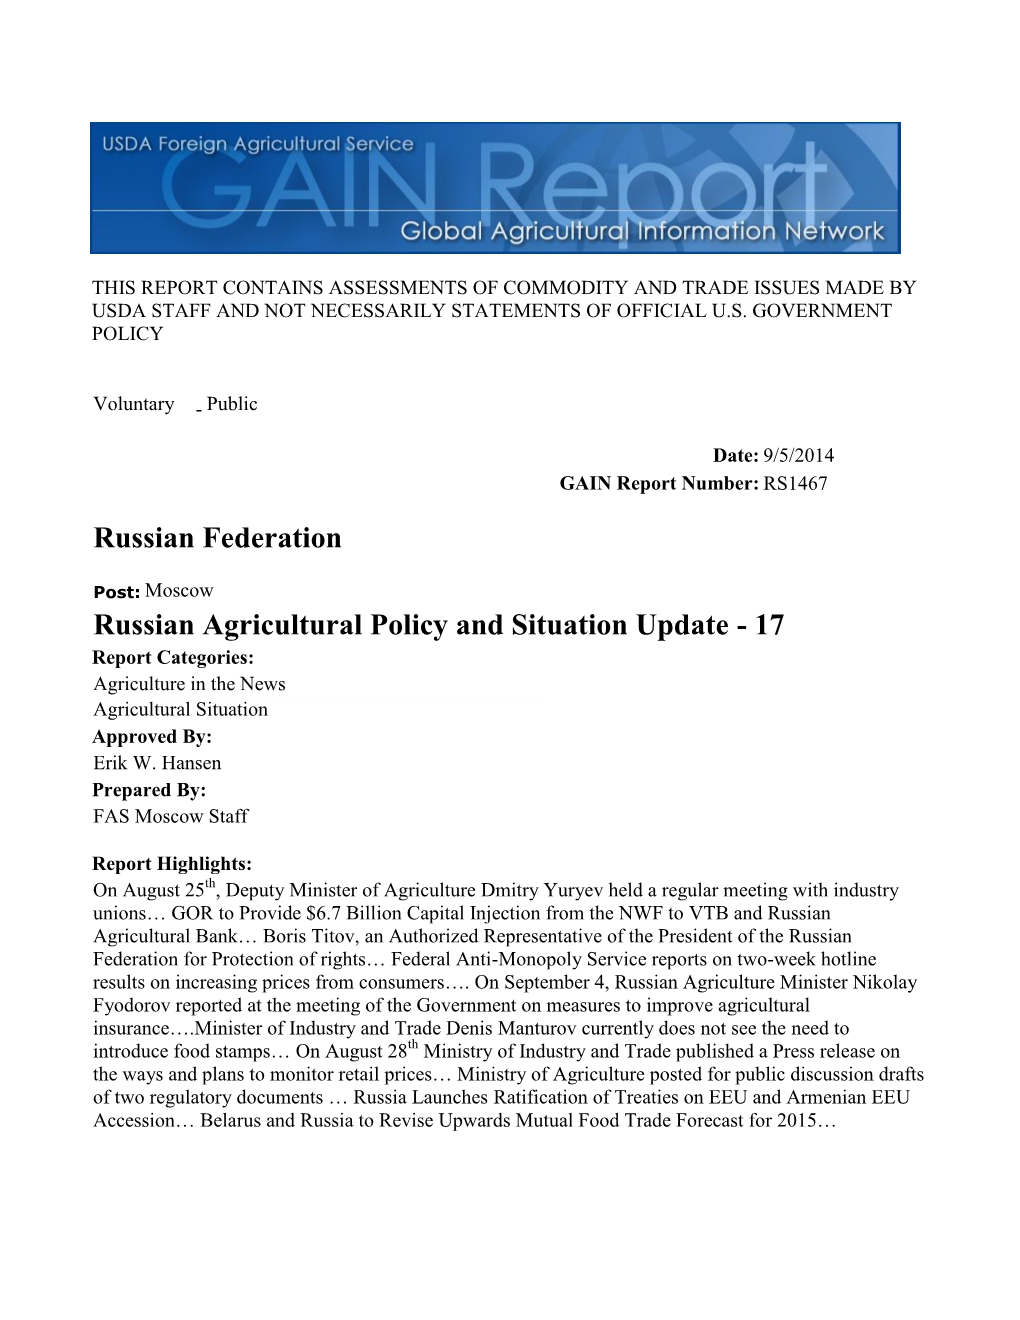 Russian Agricultural Policy and Situation Update - 17 Report Categories: Agriculture in the News Agricultural Situation Approved By: Erik W